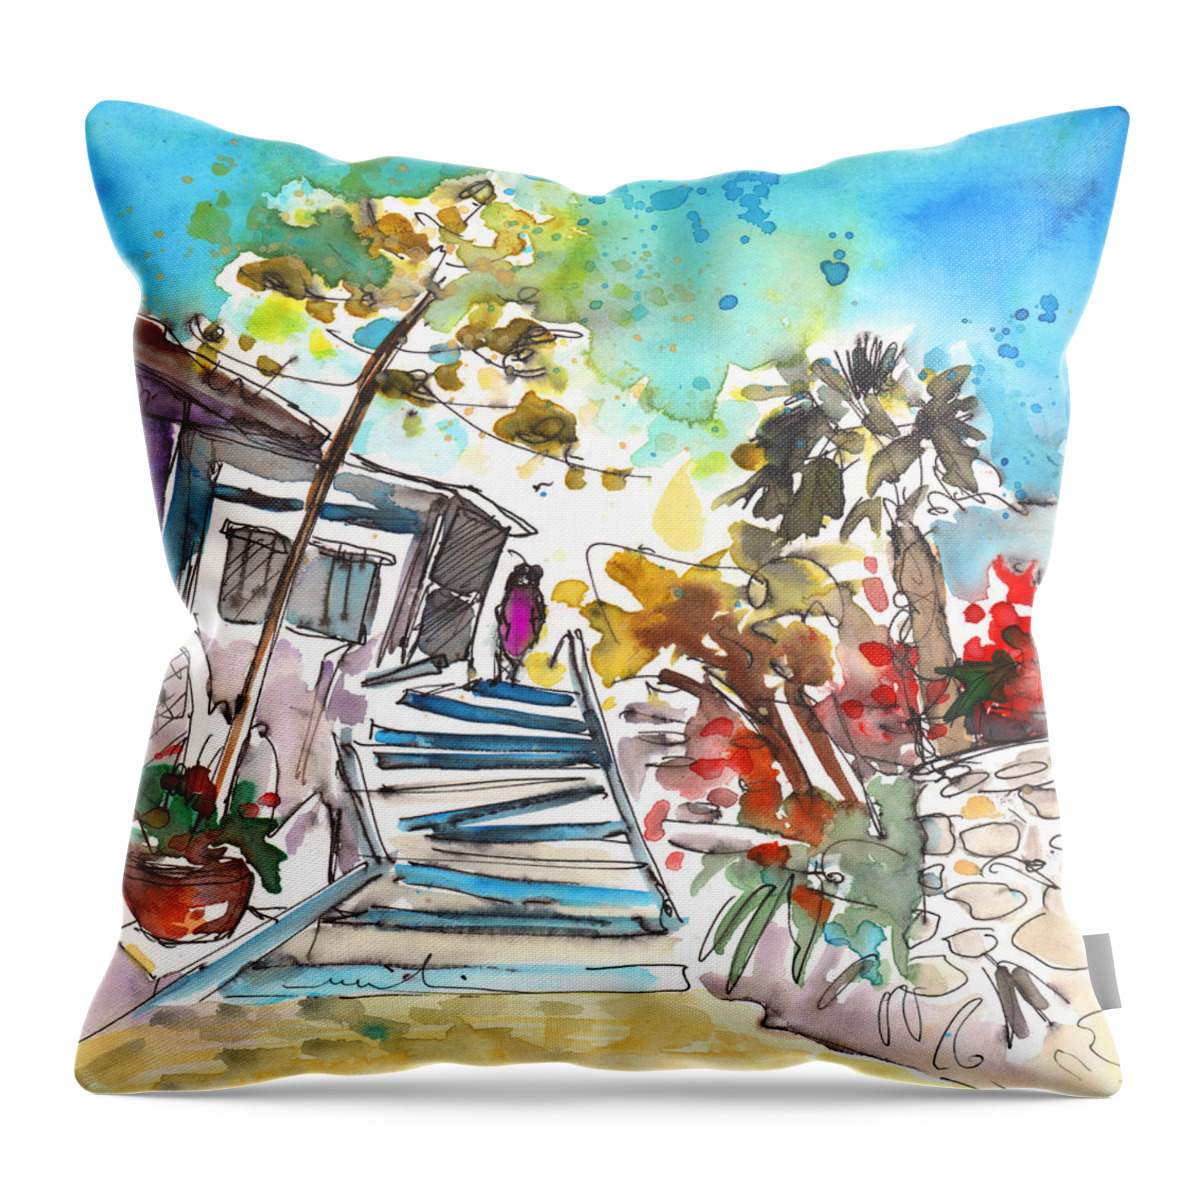 Travel Sketch Throw Pillow featuring the painting Agia Galini 03 by Miki De Goodaboom